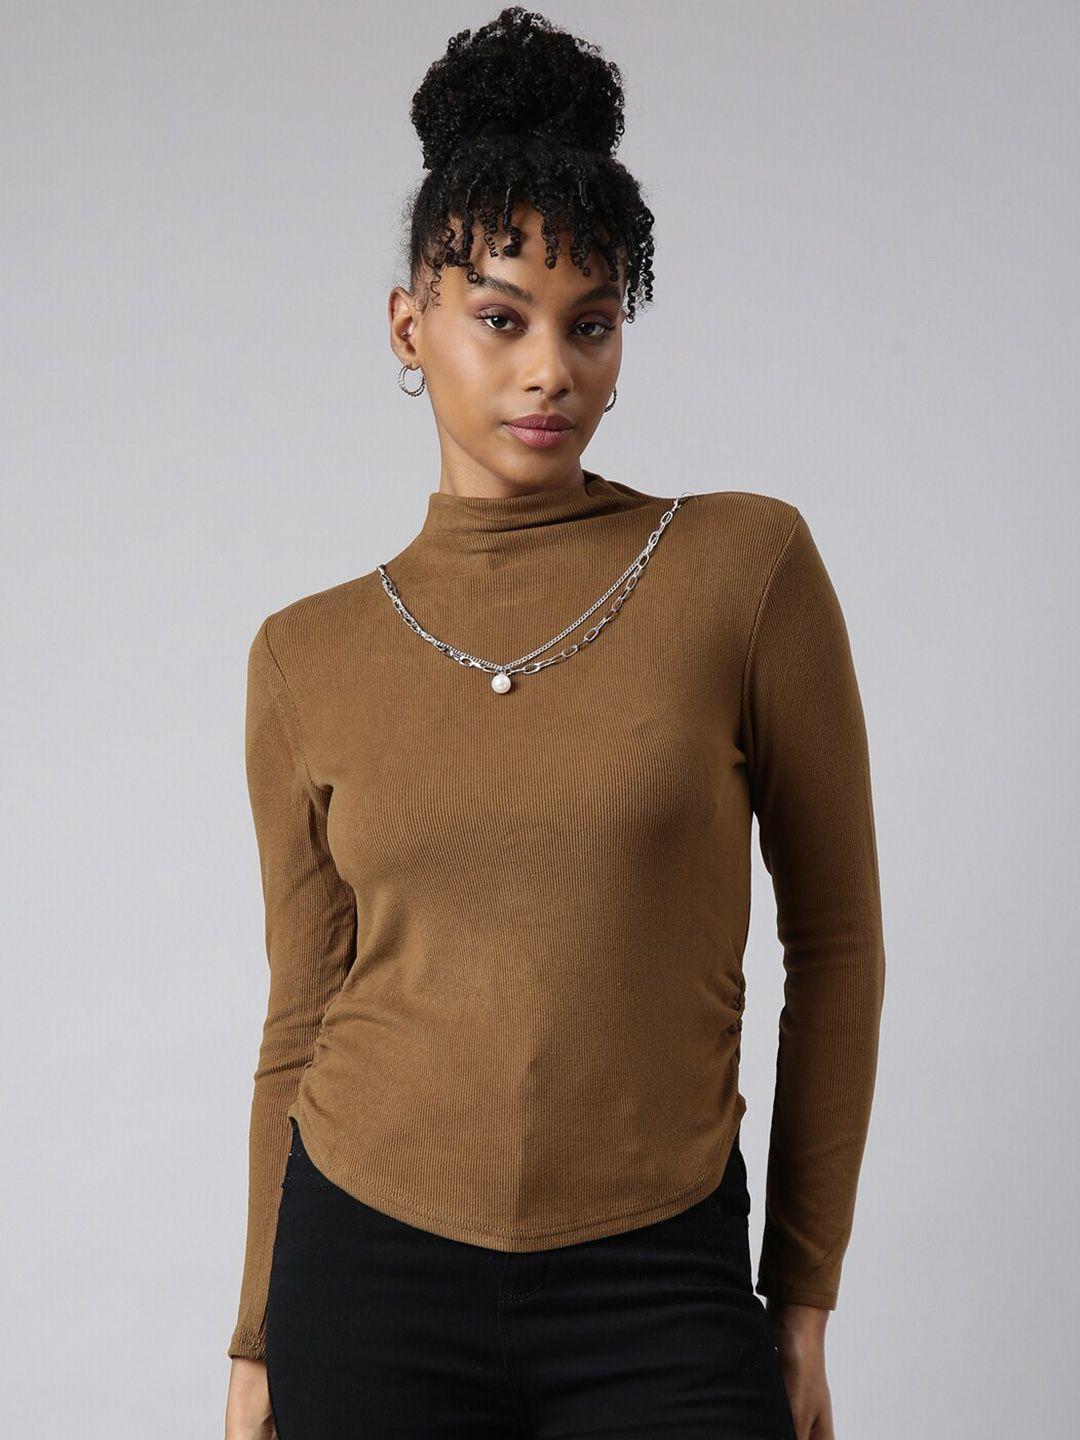 SHOWOFF High Neck Velvet Top Comes With Chain